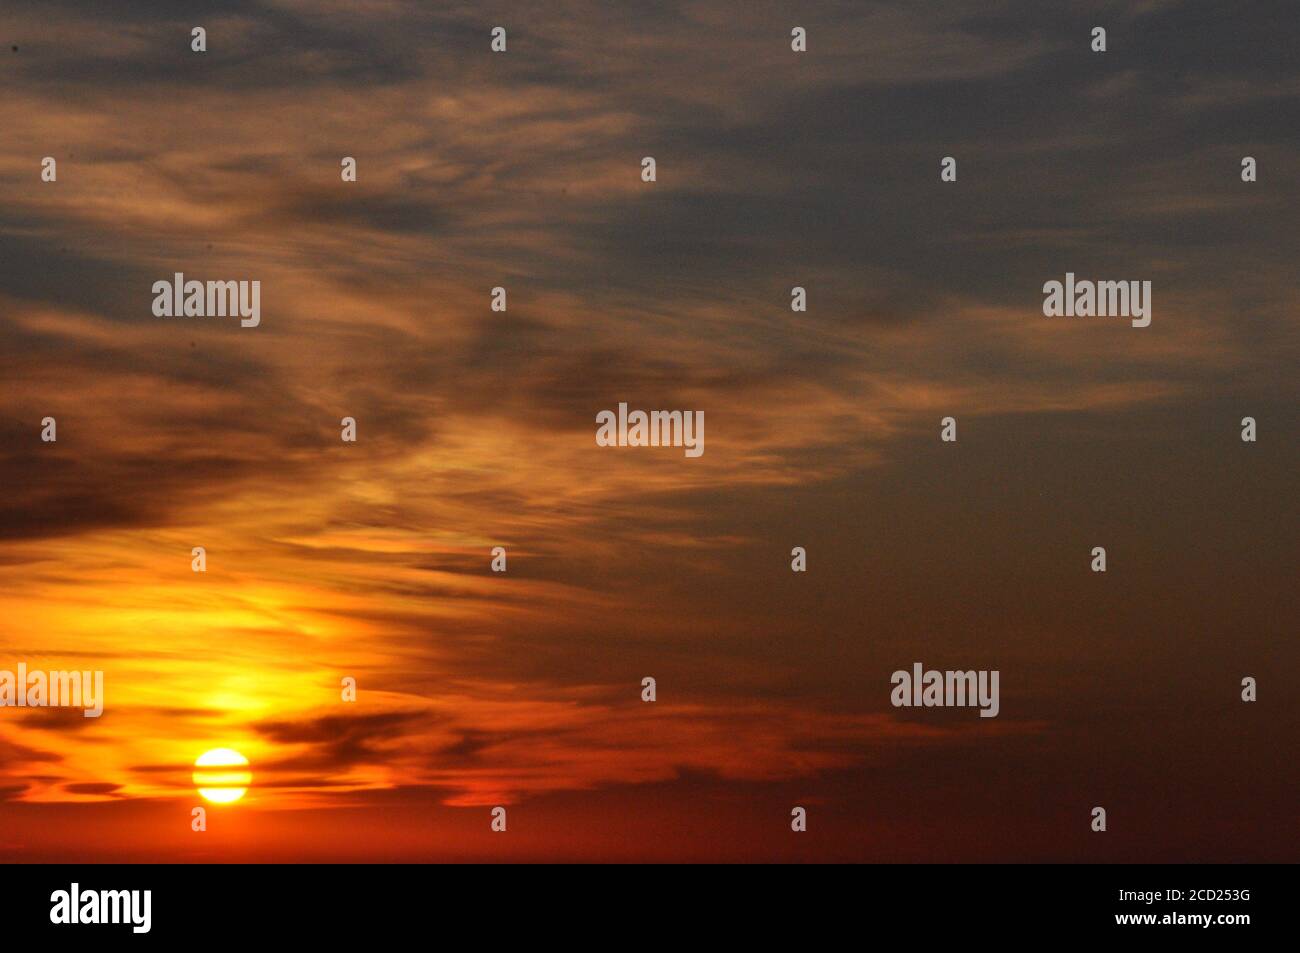 Beautiful sunset sky background with clouds hiding sun Stock Photo